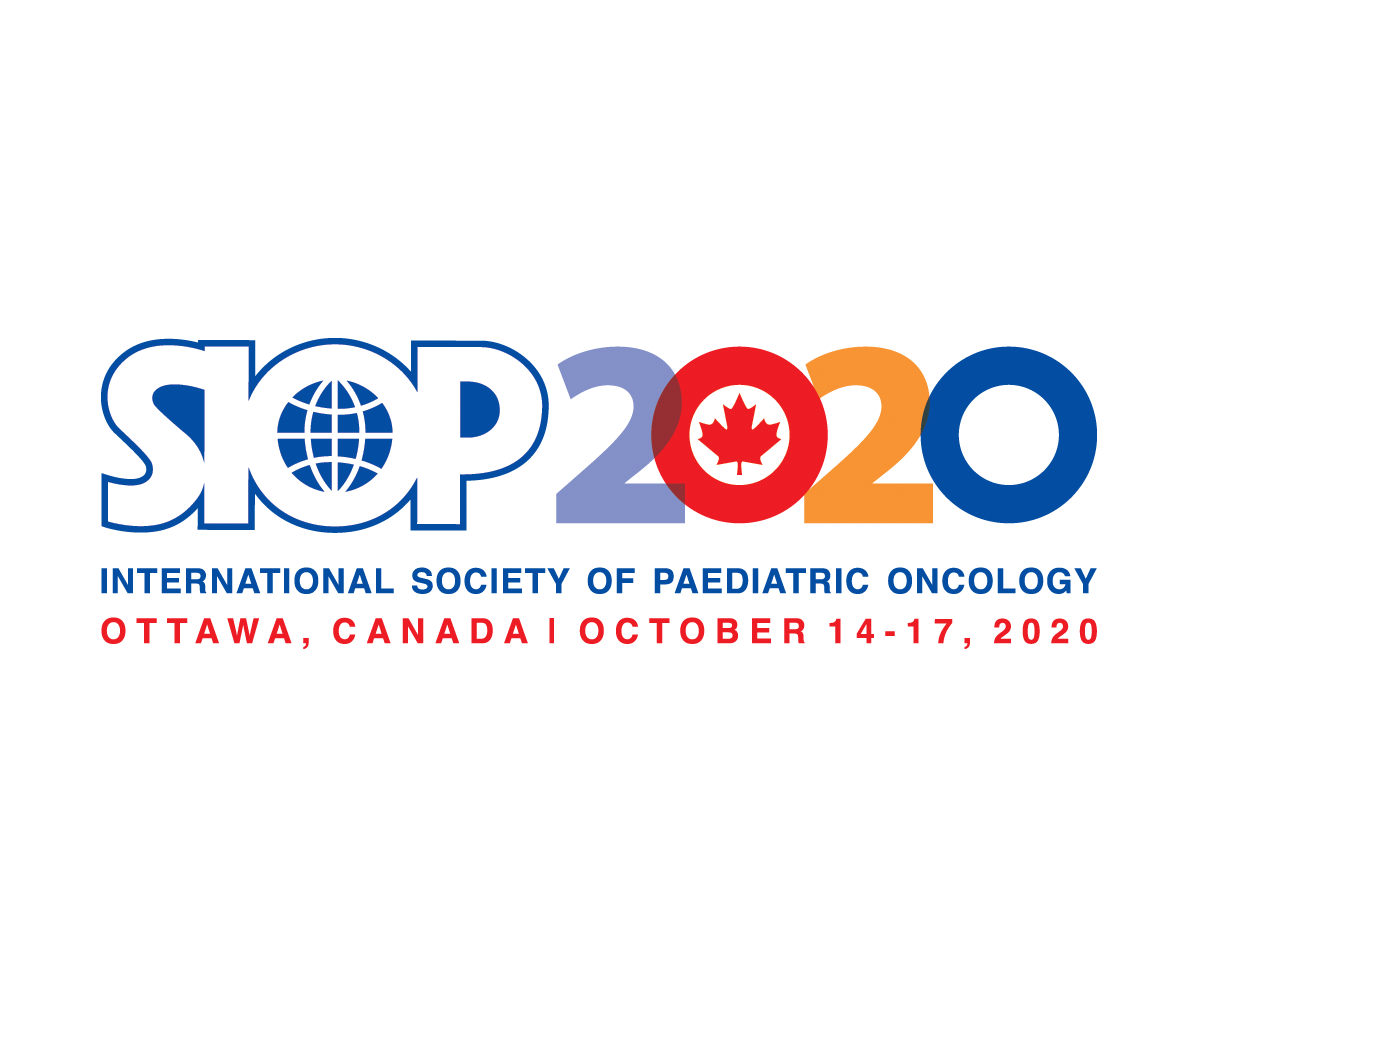 52nd Congress of the International Society of Paediatric Oncology (SIOP